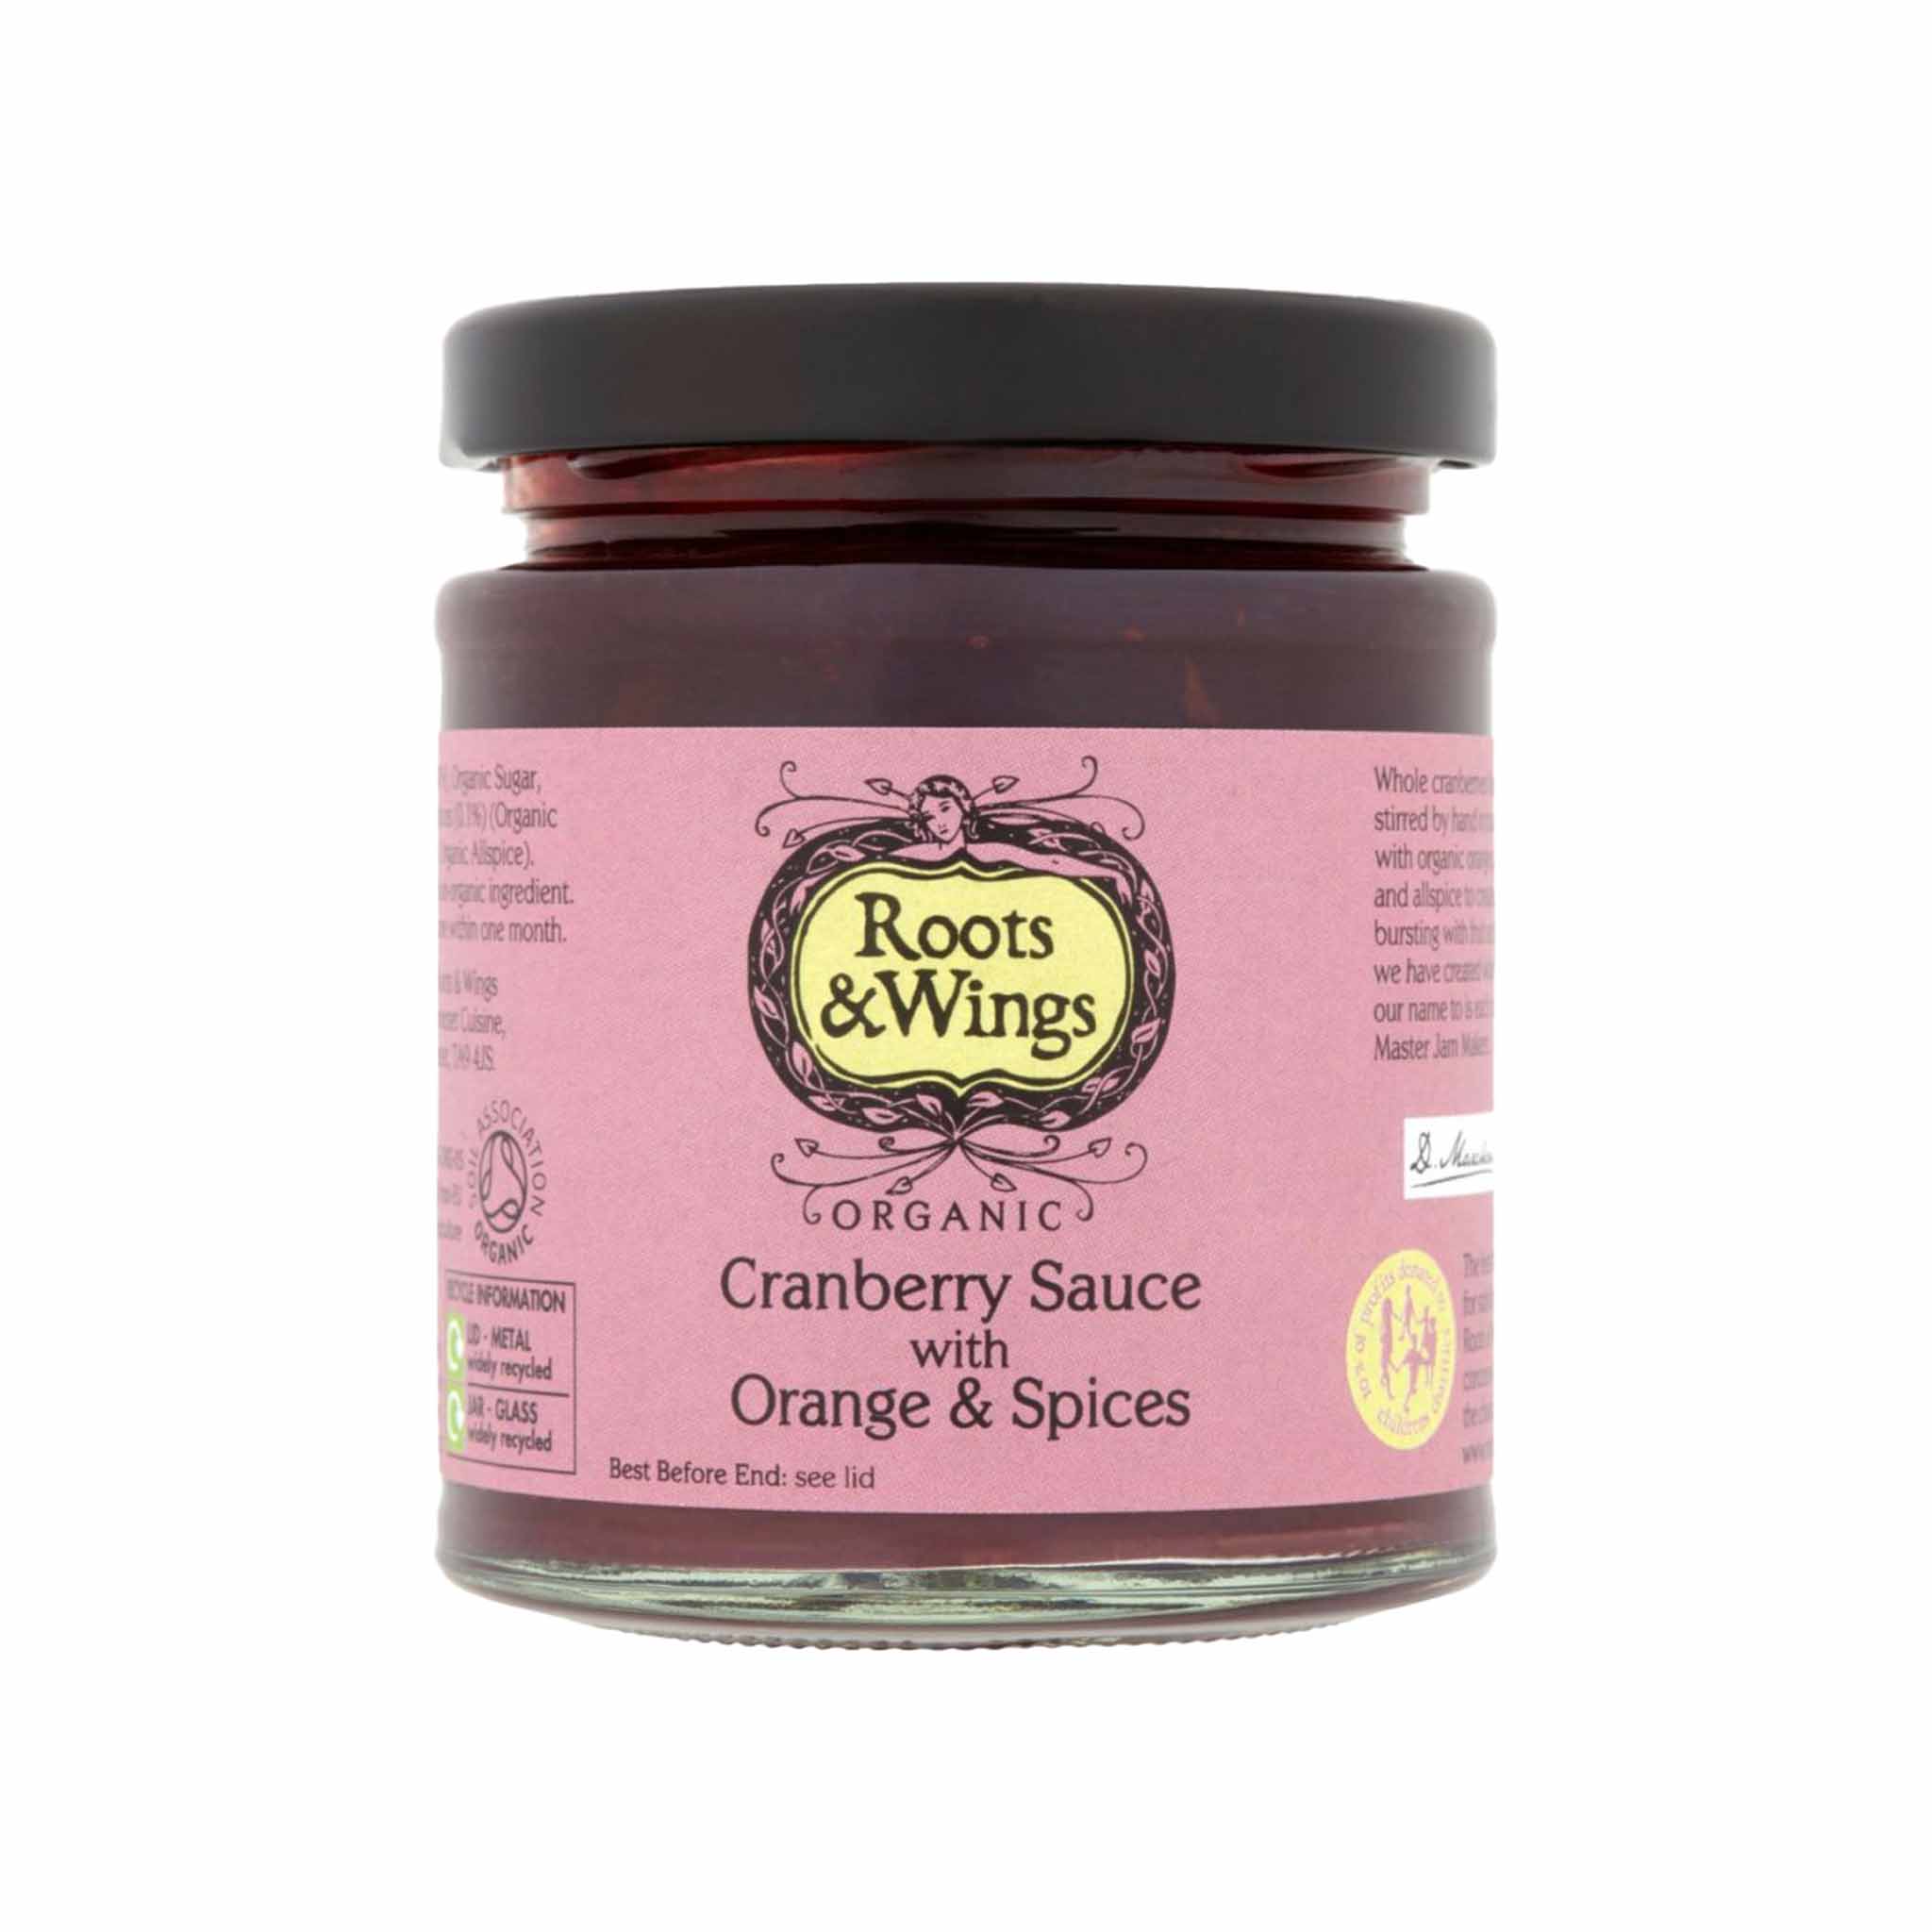 Roots Wings Organic Cranberry Sauce with Orange Spices in a Jar